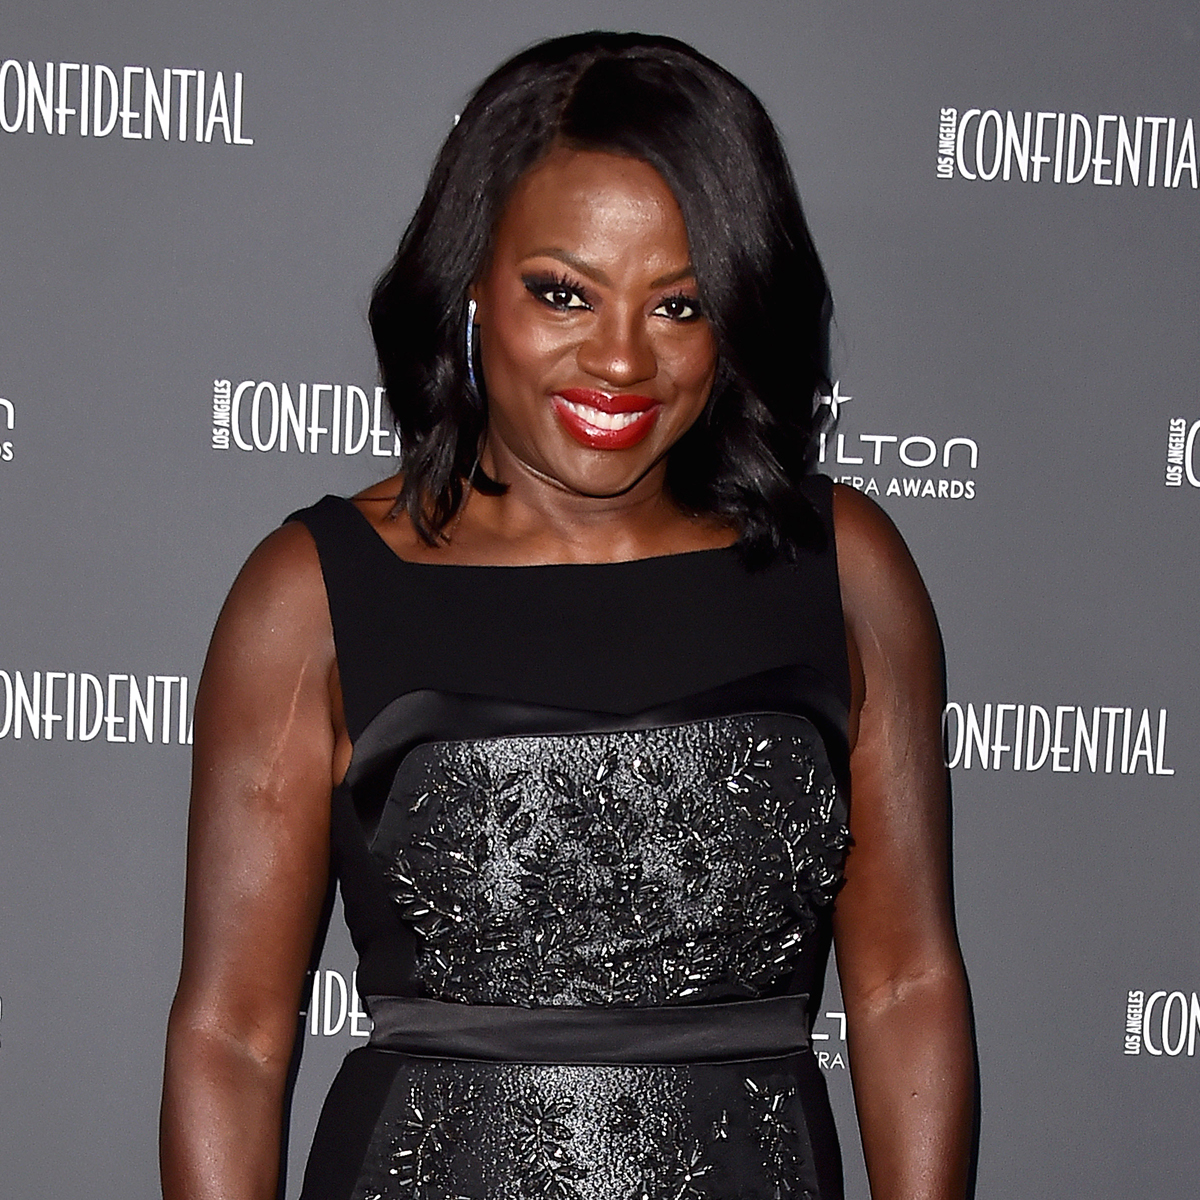 https://akns-images.eonline.com/eol_images/Entire_Site/20221015/rs_1200x1200-221115132344-1200-Viola_Davis-The_12th_Hamilton_Behind_the_Camera_Awards_2022-gj.jpg?fit=around%7C1200:1200&output-quality=90&crop=1200:1200;center,top